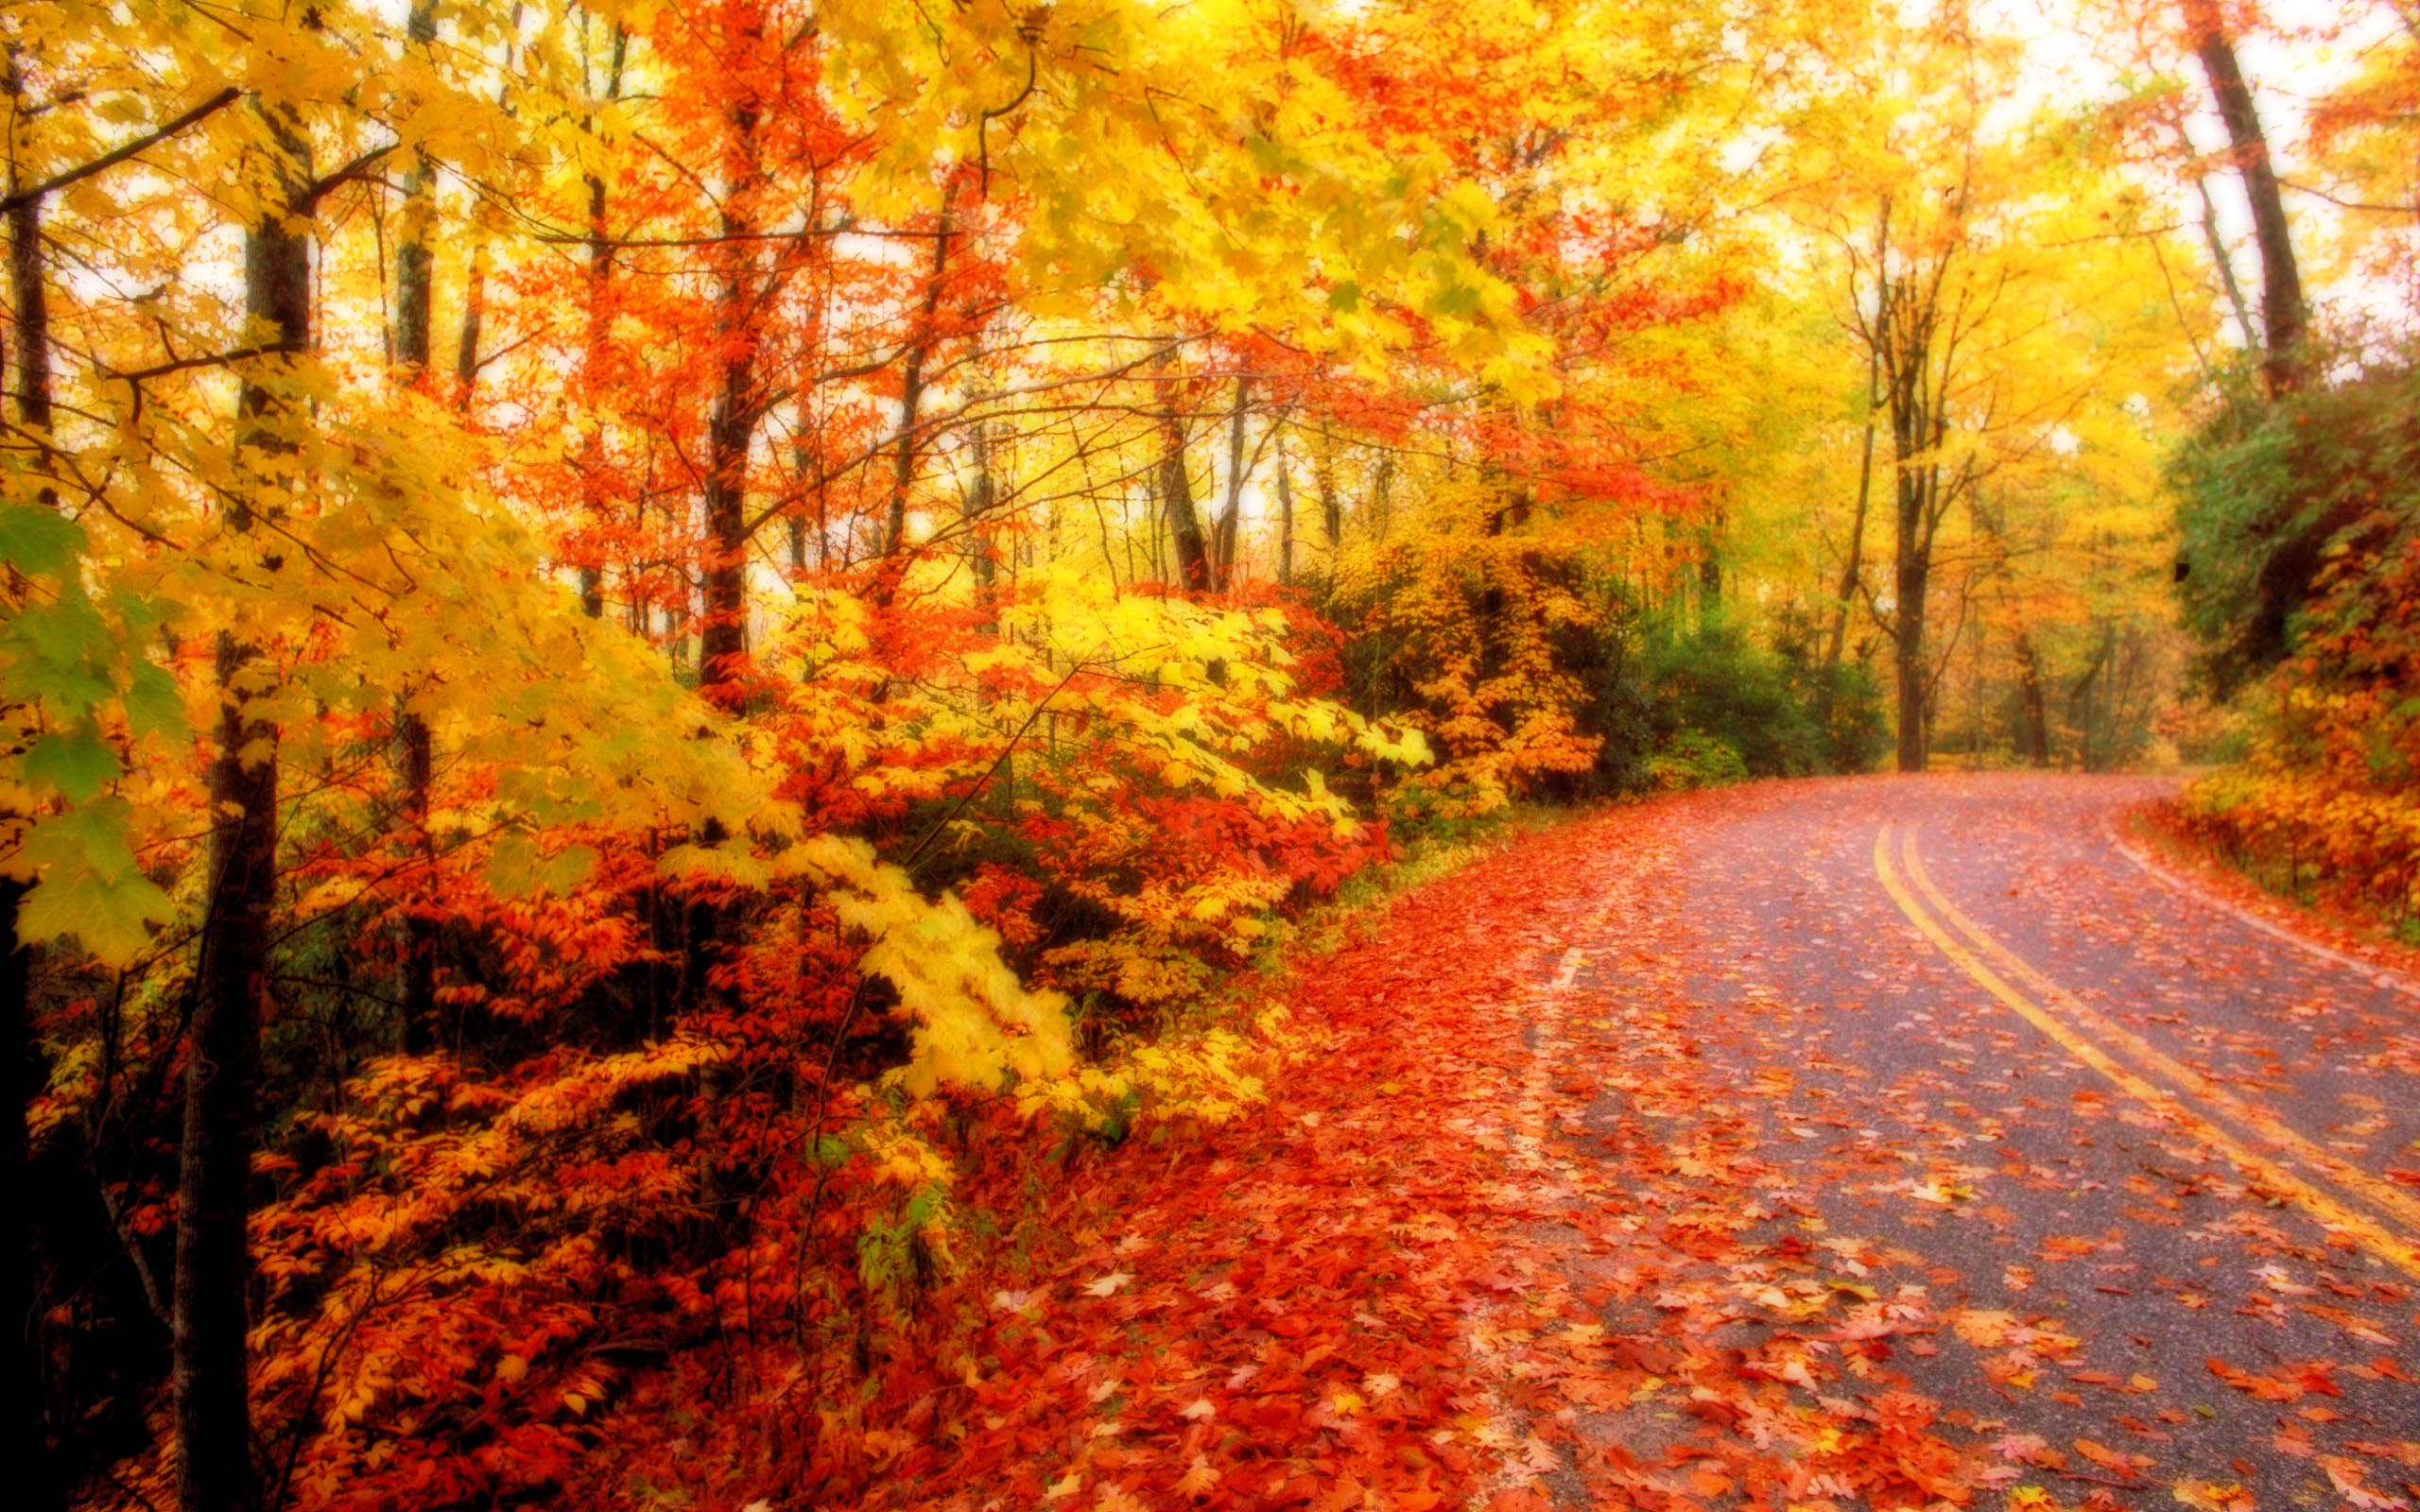 Autumn Leaves Free Desktop Wallpapers for HD Widescreen and Mobile